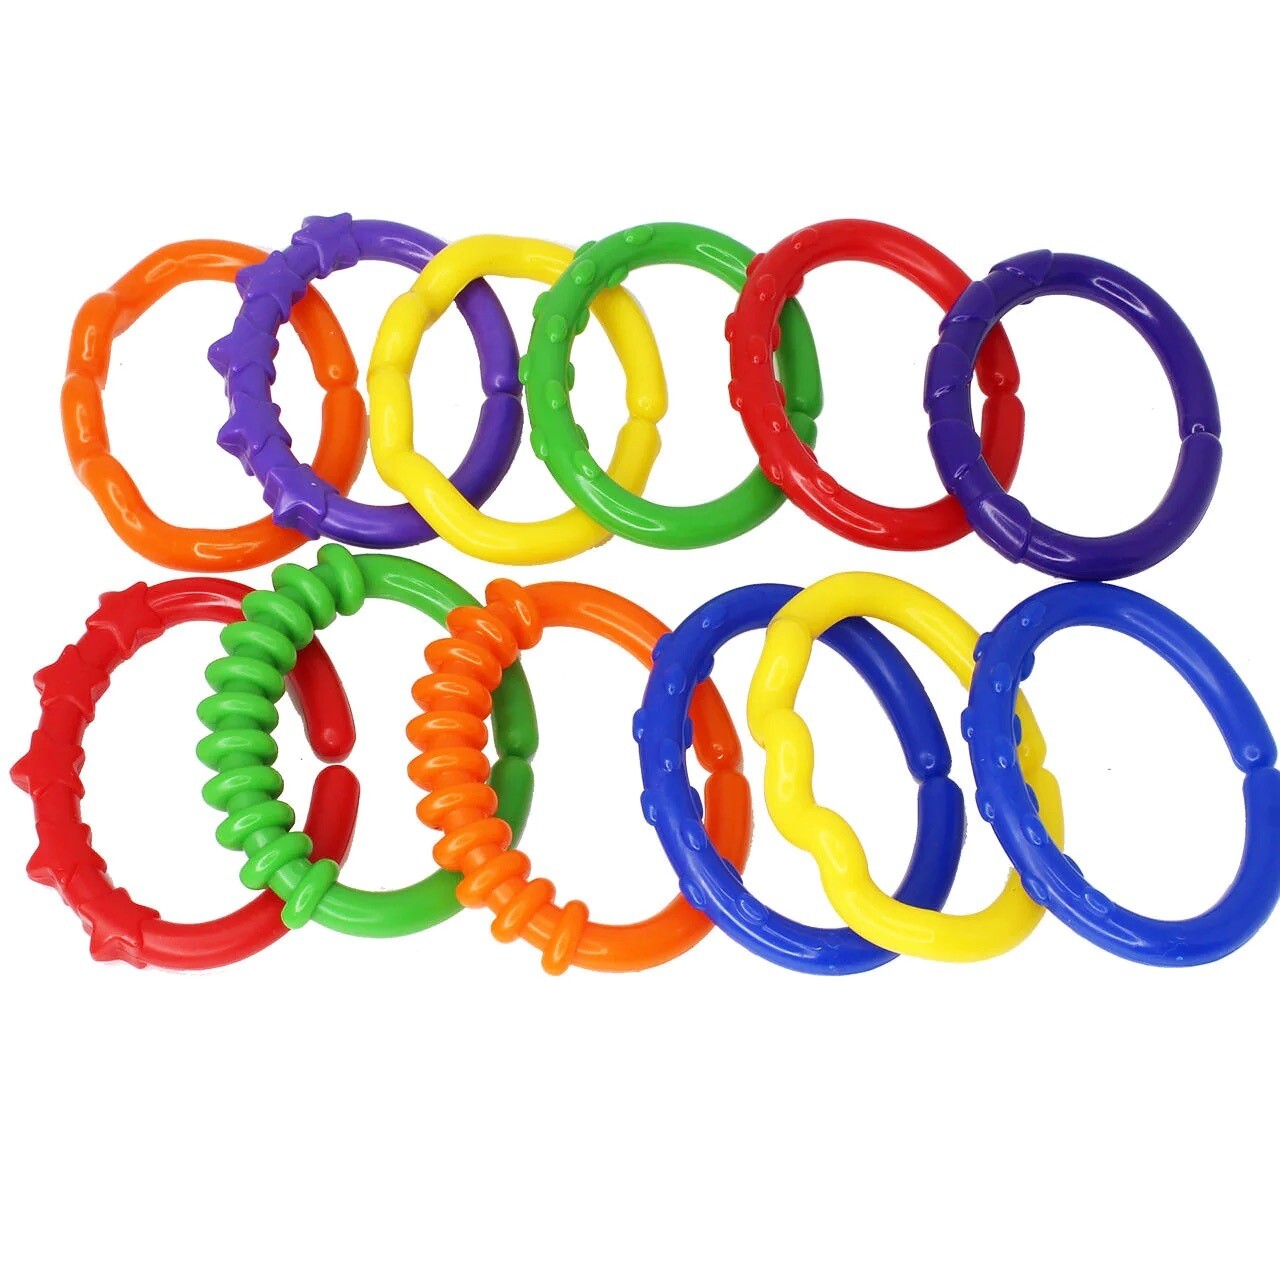 12 Pack Large Plastic "C" Links - Great to utilize to hang toys for the Large Birds who like to mess with those Quick Links!